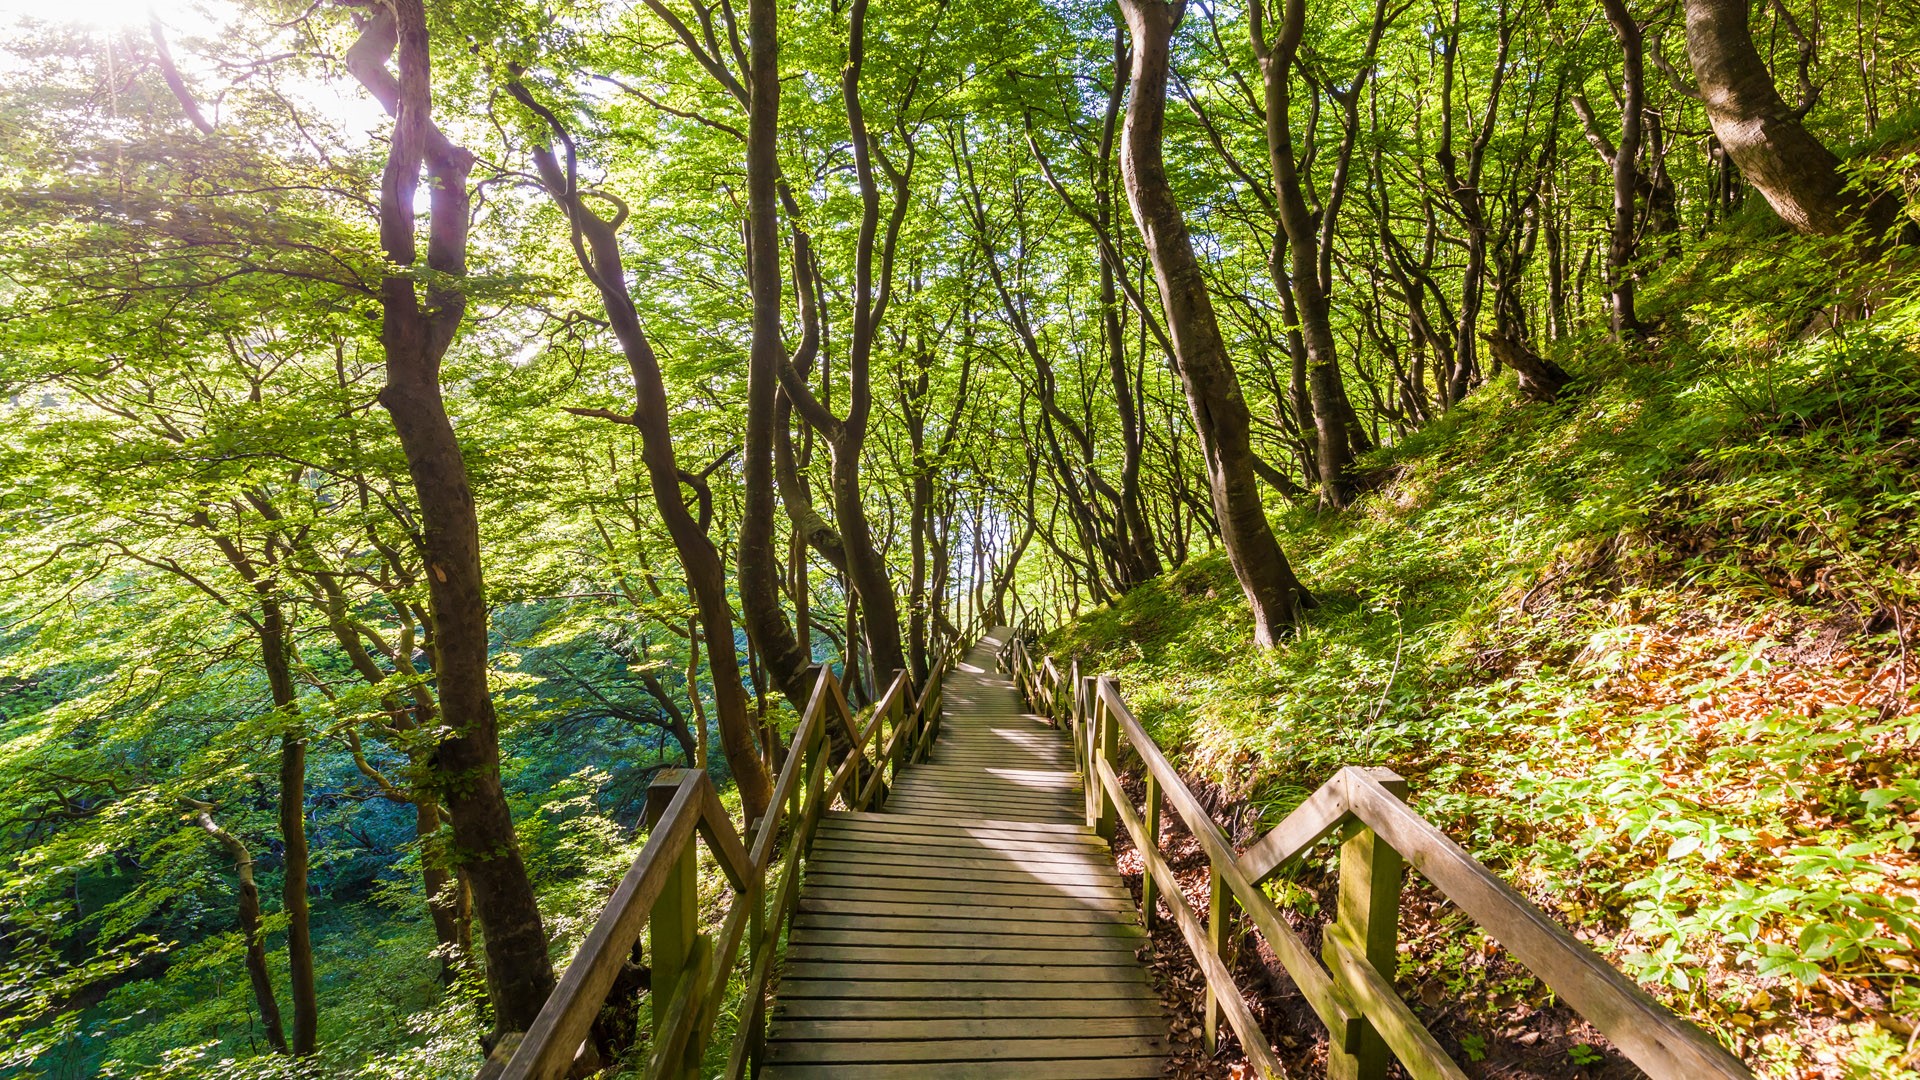 General 1920x1080 nature landscape trees forest plants leaves sun rays tropical wooden walkway walkway Denmark